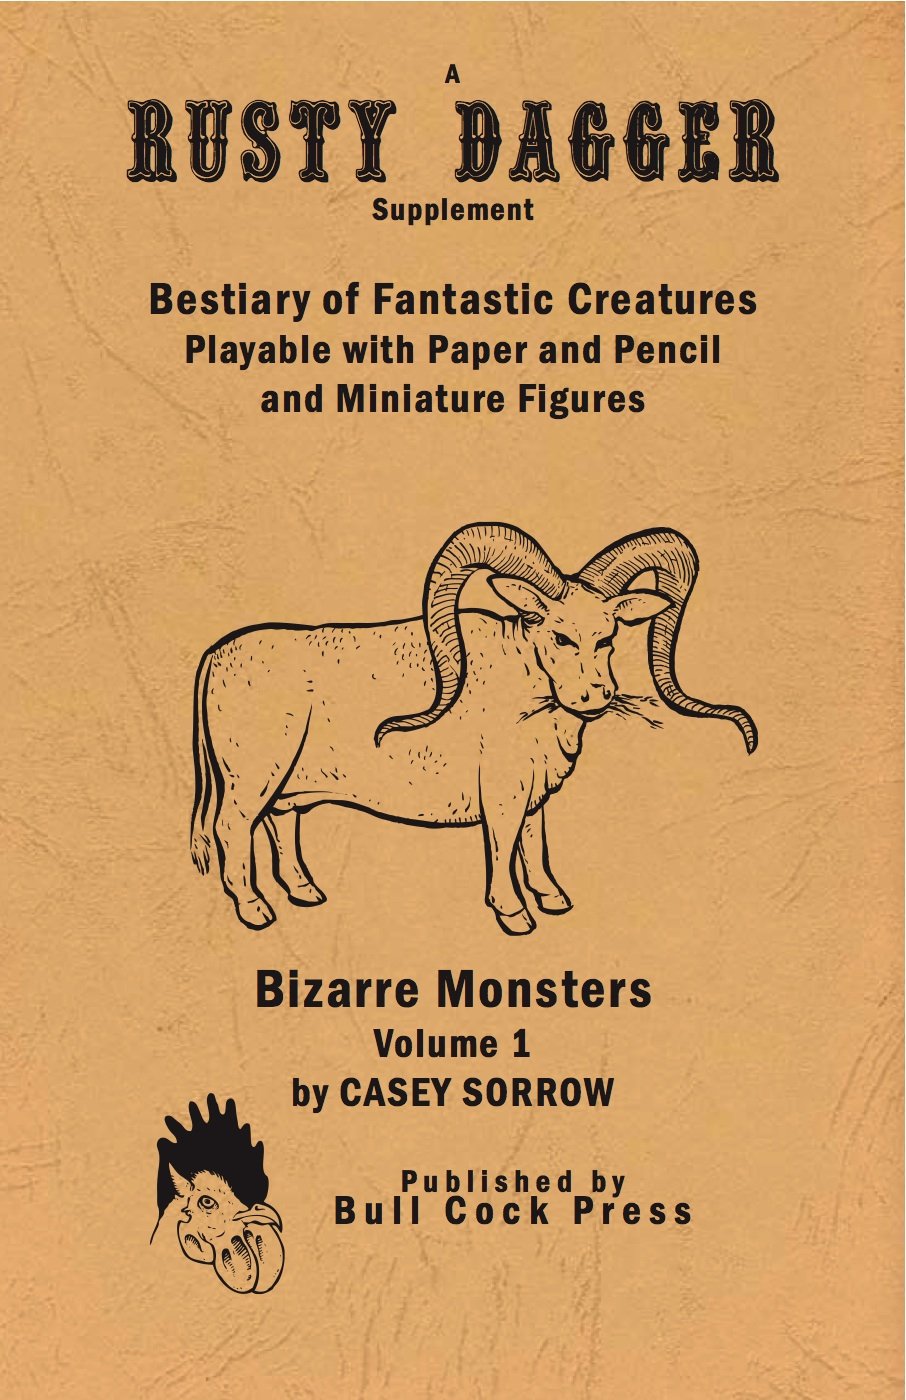 Bestiary of Fantastic Creatures Playable with Paper Pencil and Miniature Figures by Casey Sorrow - Odd Nodd Art Supply